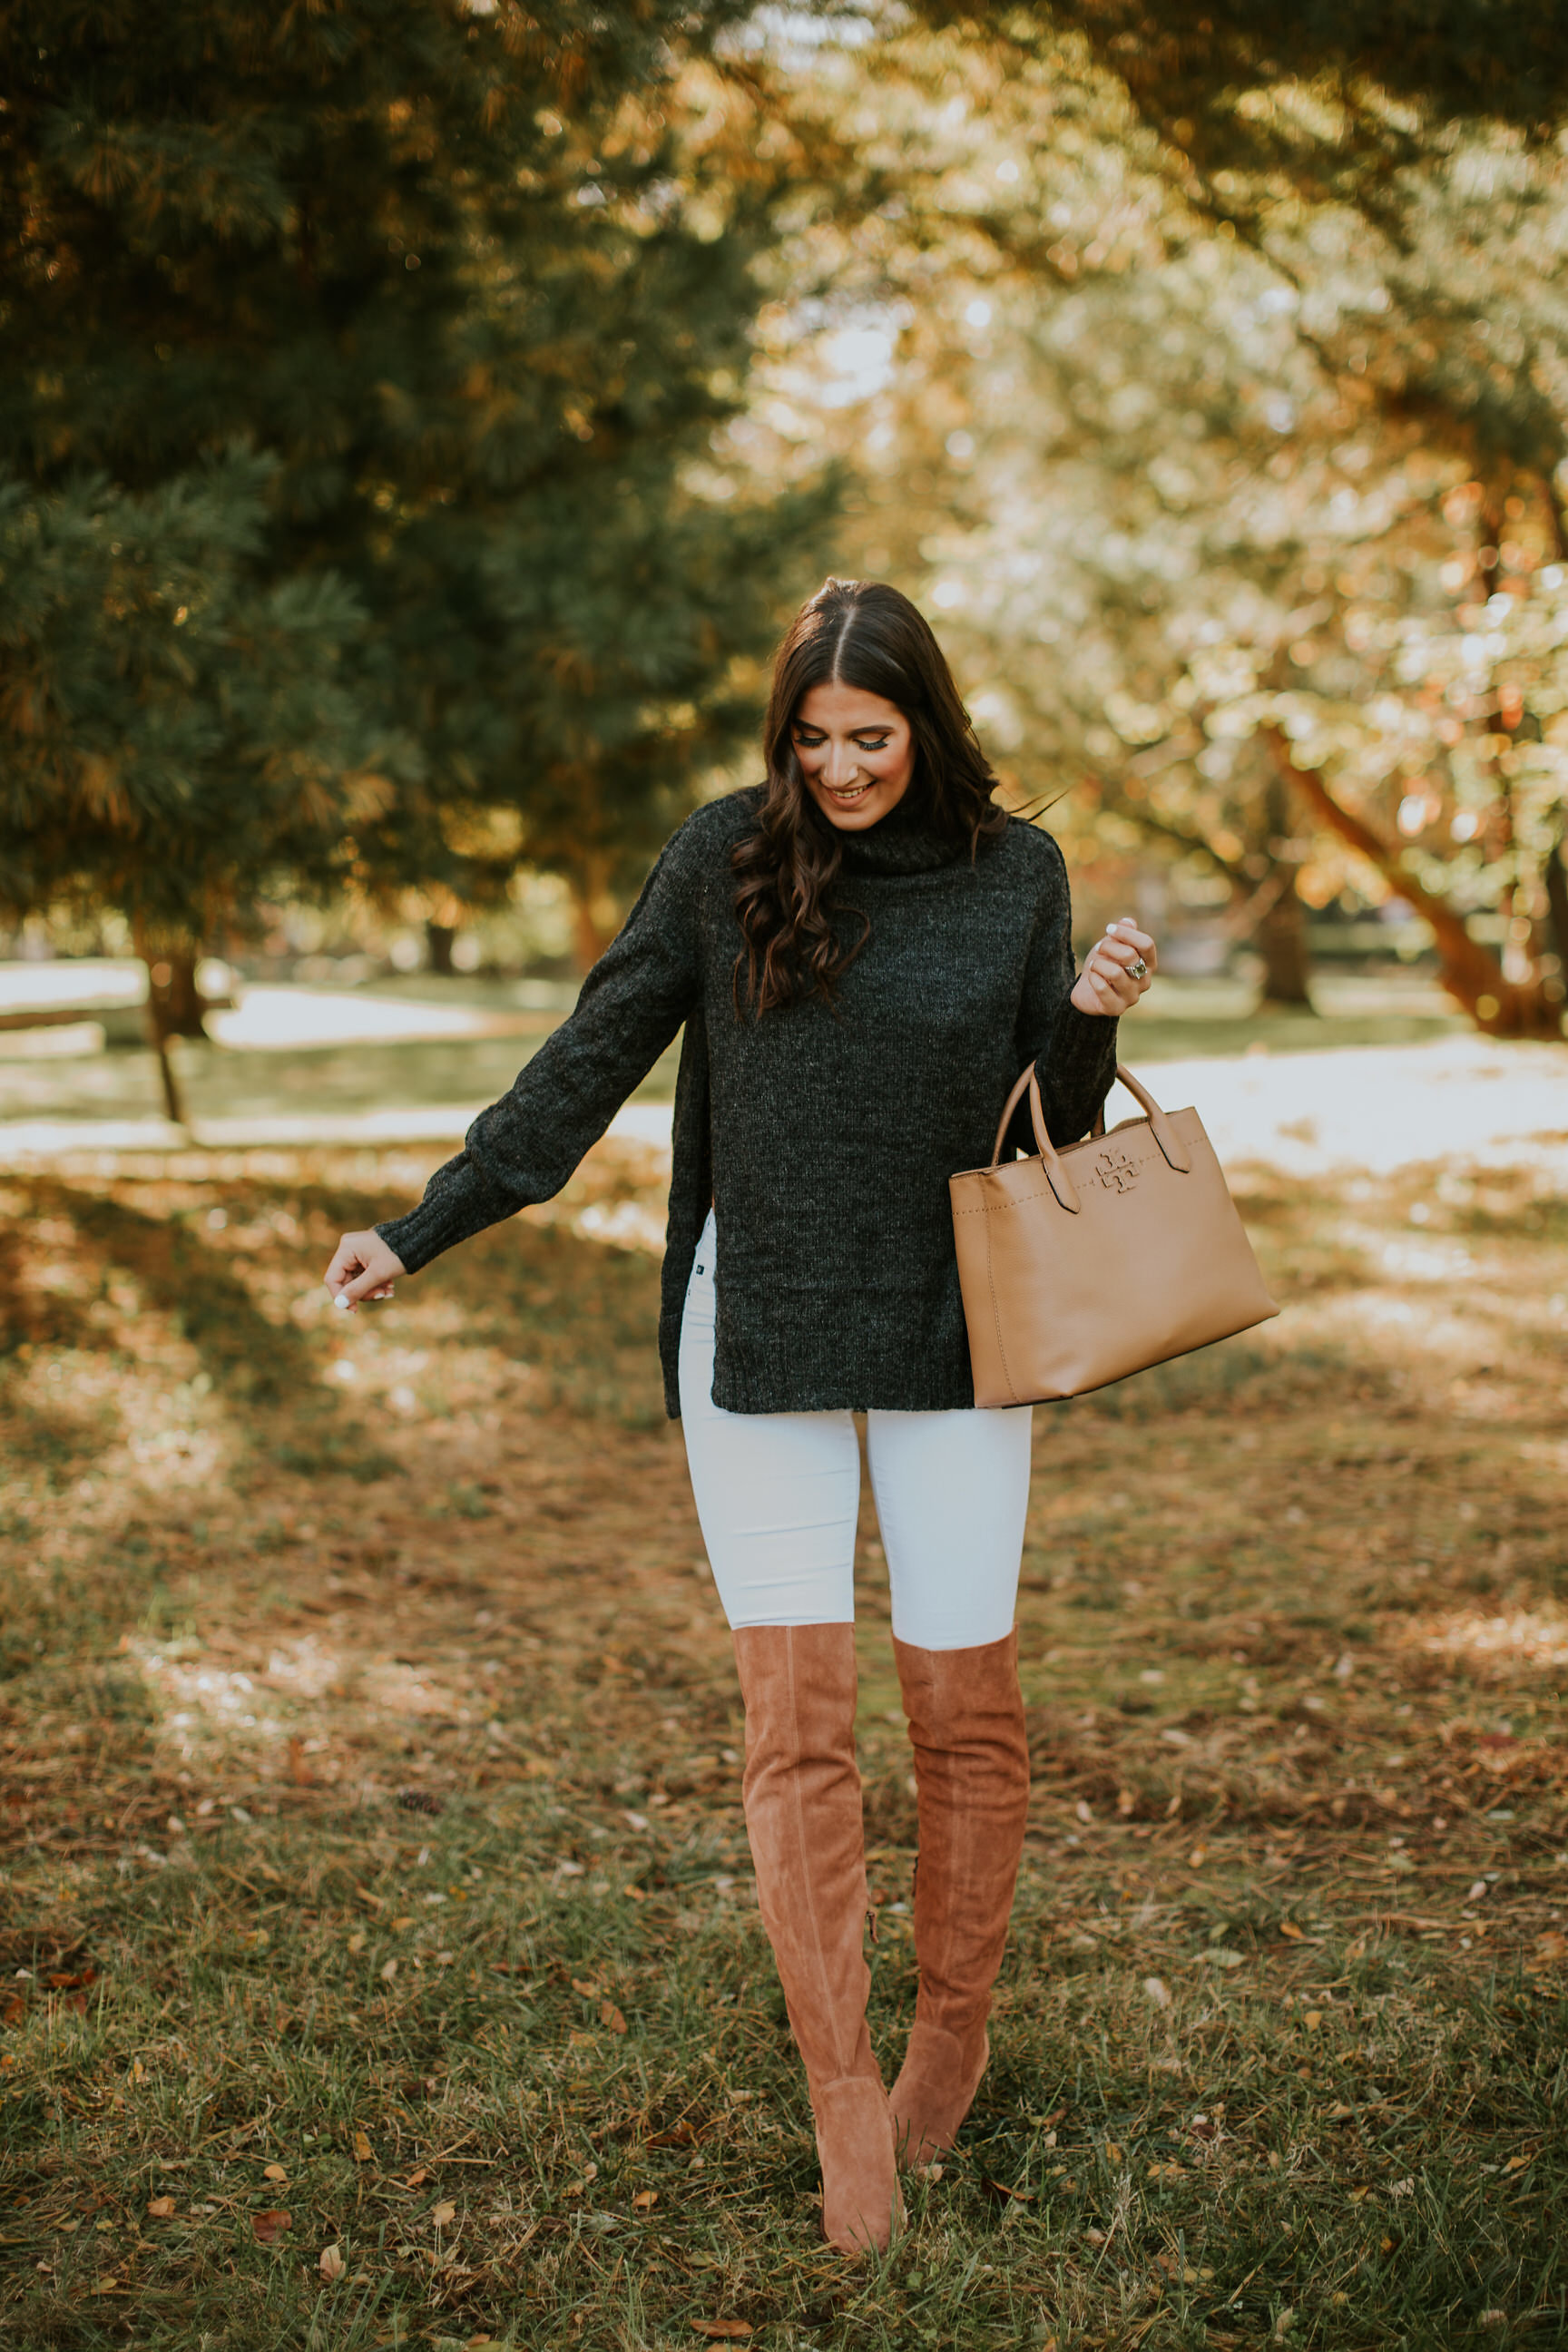 side split turtleneck, chunky turtleneck, fall style, fall fashion, fall inspo, fall inspiration, over the knee boots, charcoal sweater, holiday style, black friday sales, thanksgiving sales, black friday deals, black friday 2017, 2017 black friday sales, cyber monday sales // grace wainwright a southern drawl